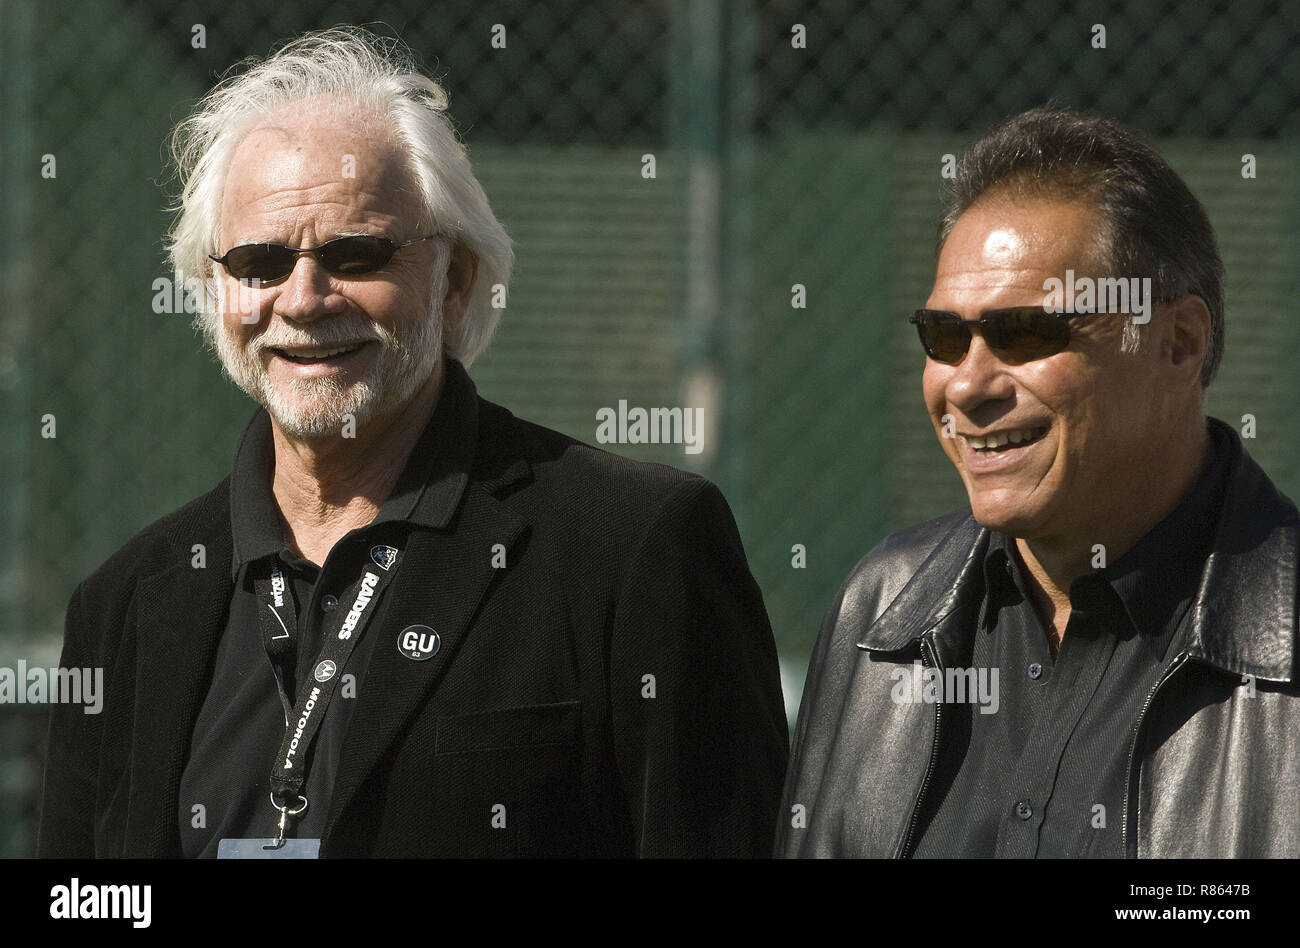 Oakland, California, USA. 19th Oct, 2008. Former Raider Quarterbacks Kenny ''the Snake'' Stabler (1970-1979) and Jim Plunkett (1978-1986) Pay tribute to friend and fellow Raider Gene Upshaw on Sunday, October 19, 2008, at Oakland-Alameda County Coliseum in Oakland, California. The Raiders defeated the Jets 16-13. Credit: Al Golub/ZUMA Wire/Alamy Live News Stock Photo